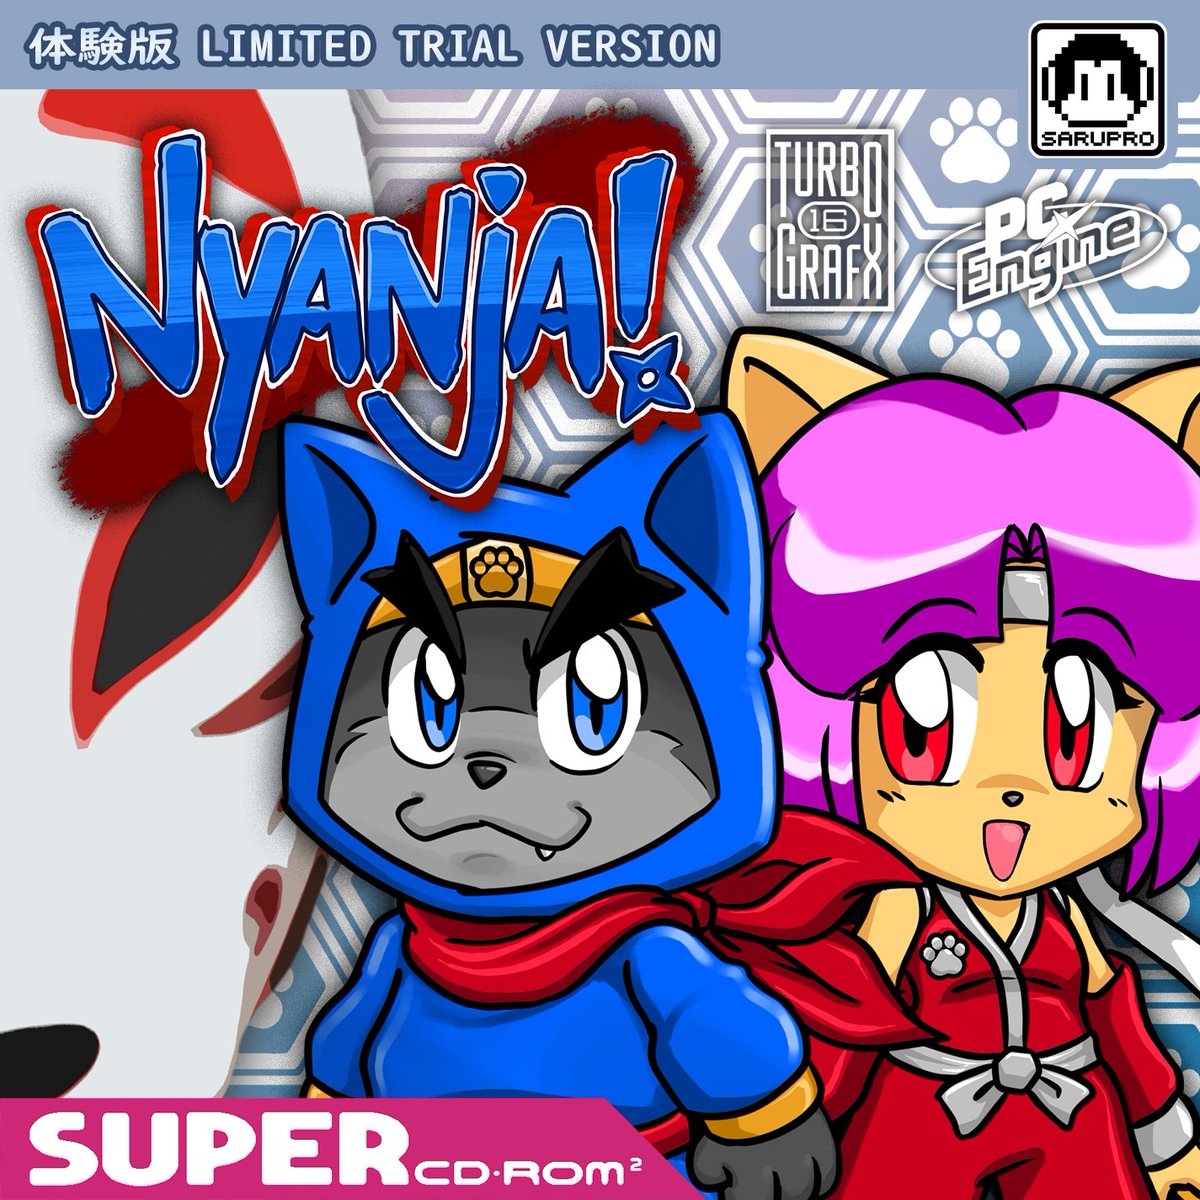 The first 'Nyanja!' demo for the PC Engine is now available for download. You can burn the CD and play on real hardware or play it on your MiSTer or emulator of choice. Available now at sarupro.itch.io 

#indiedev #pcengine #RETROGAMING #PCエンジン